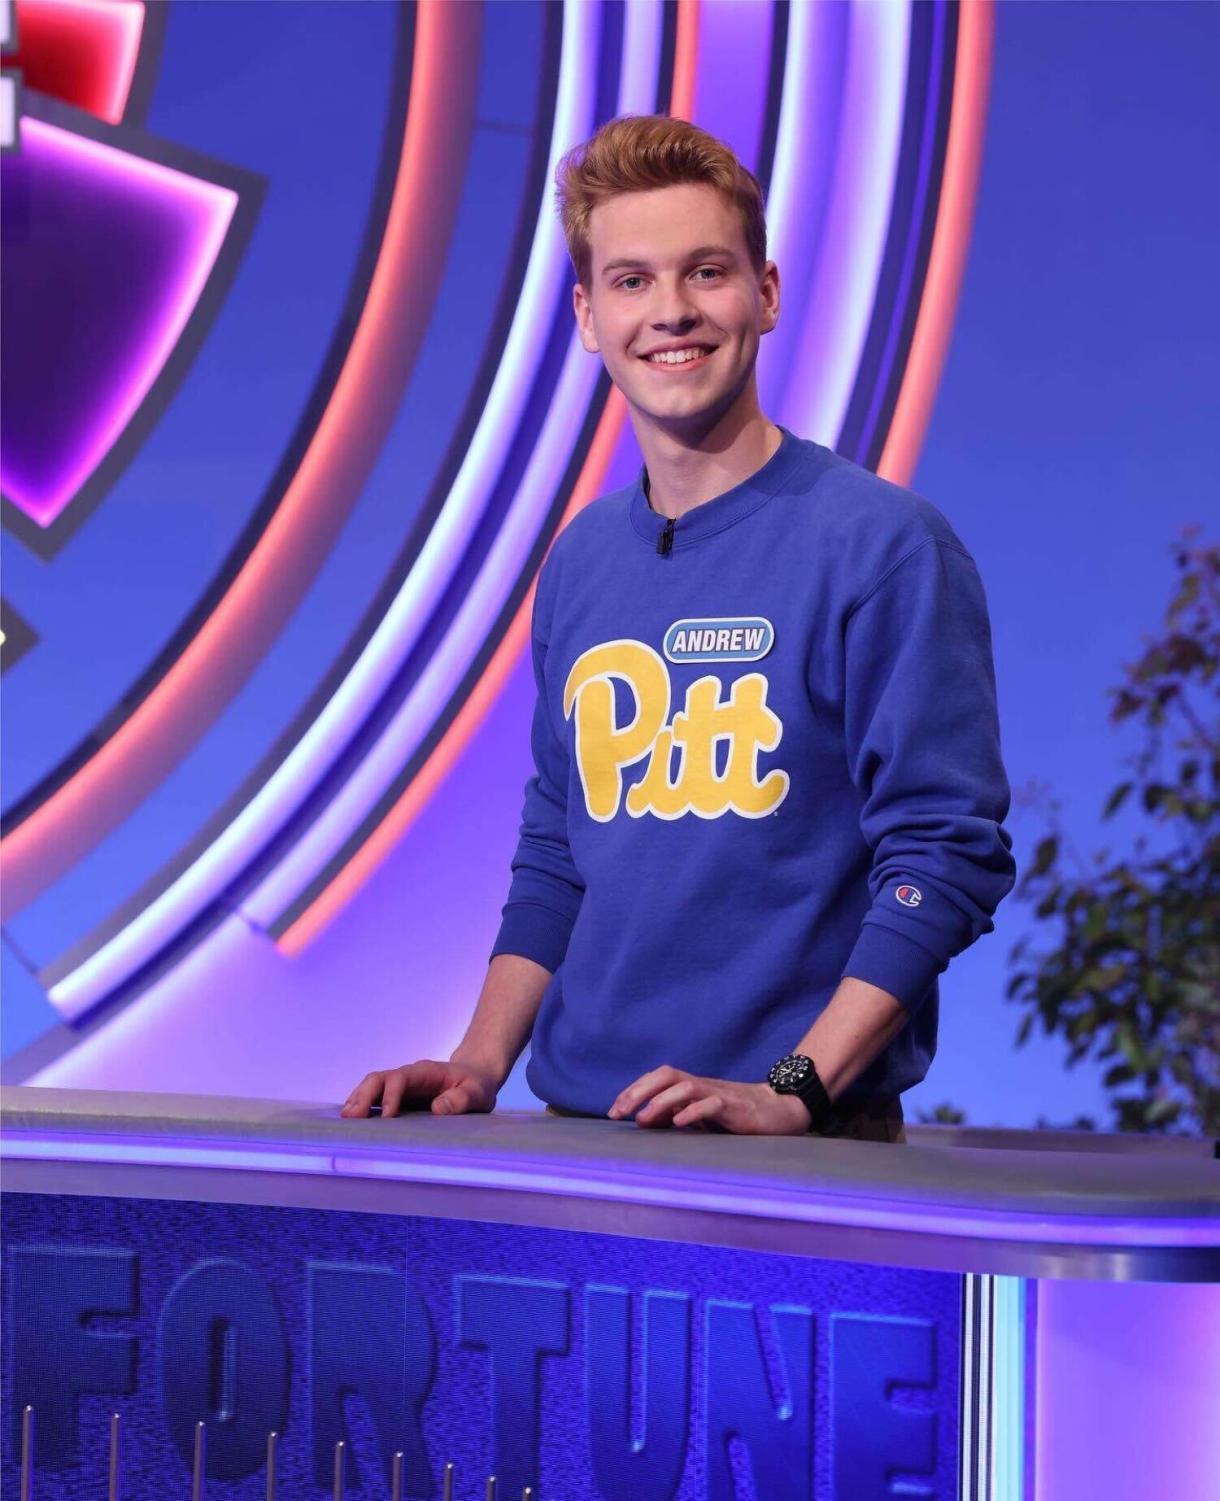 Can I buy an L-O-L? Pitt student brings comedy to Wheel of Fortune - The  Pitt News